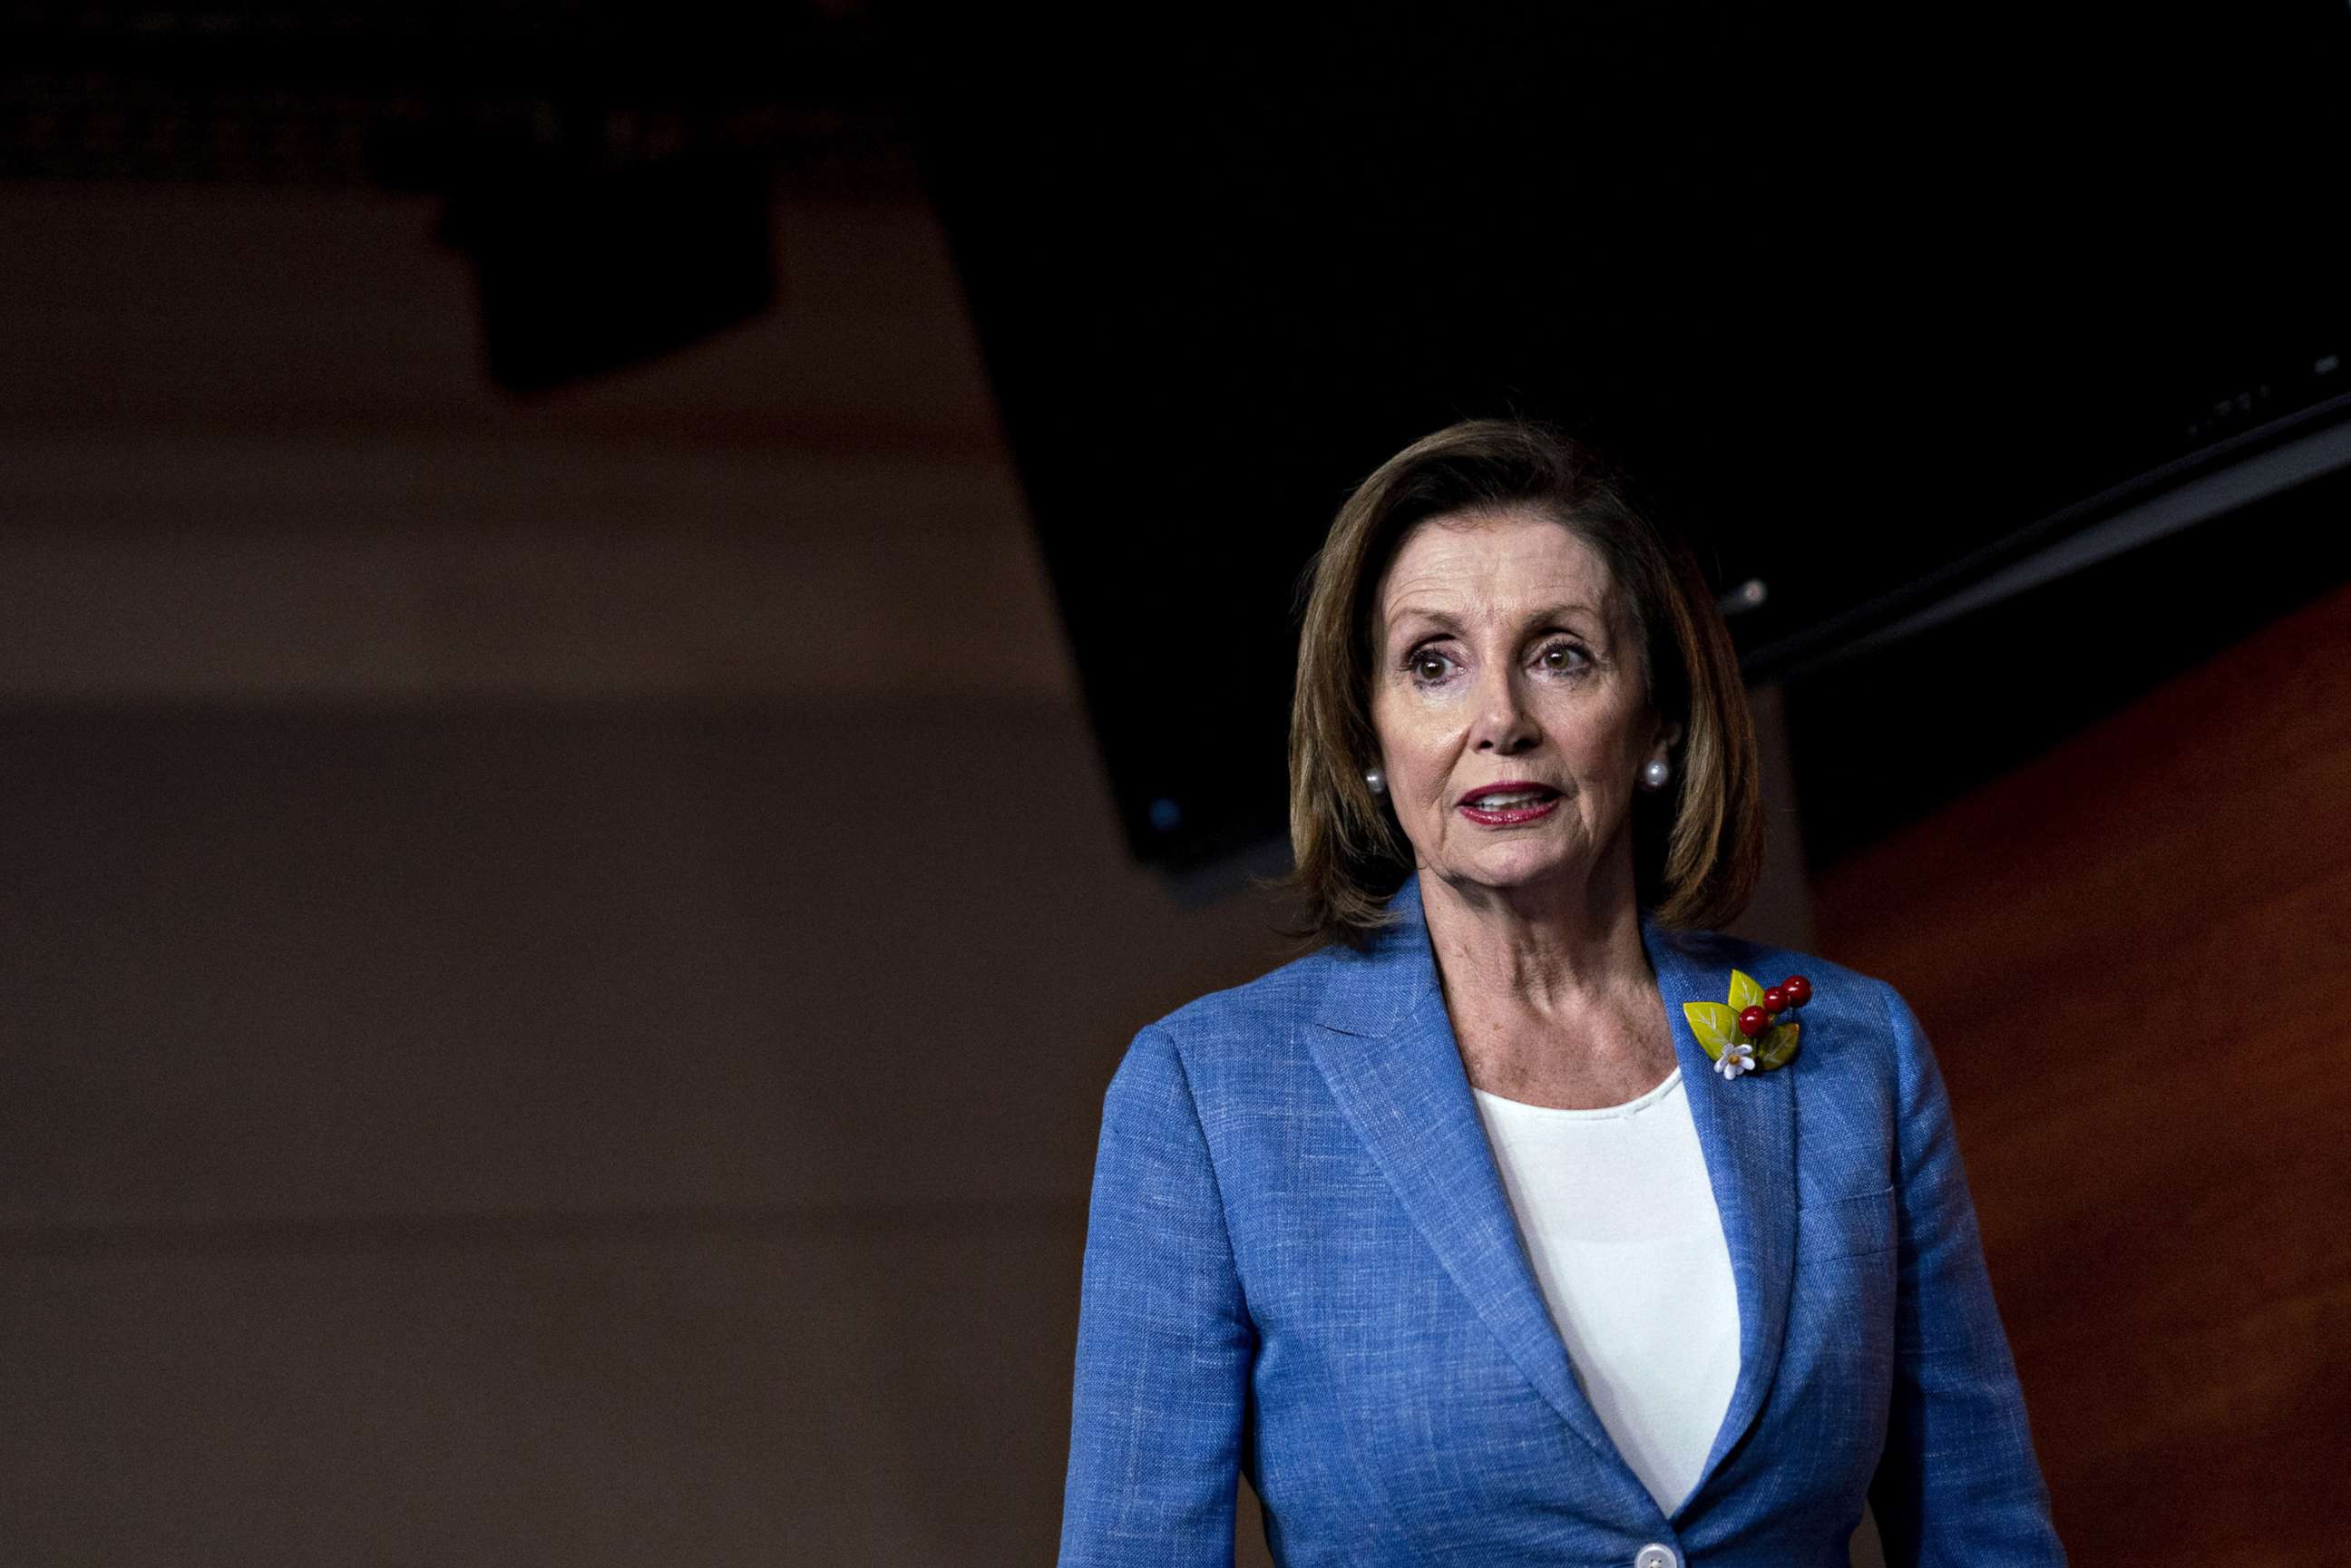 PHOTO: House Speaker Nancy Pelosi arrives for a news conference on Capitol Hill in Washington, D.C., July 26, 2019.